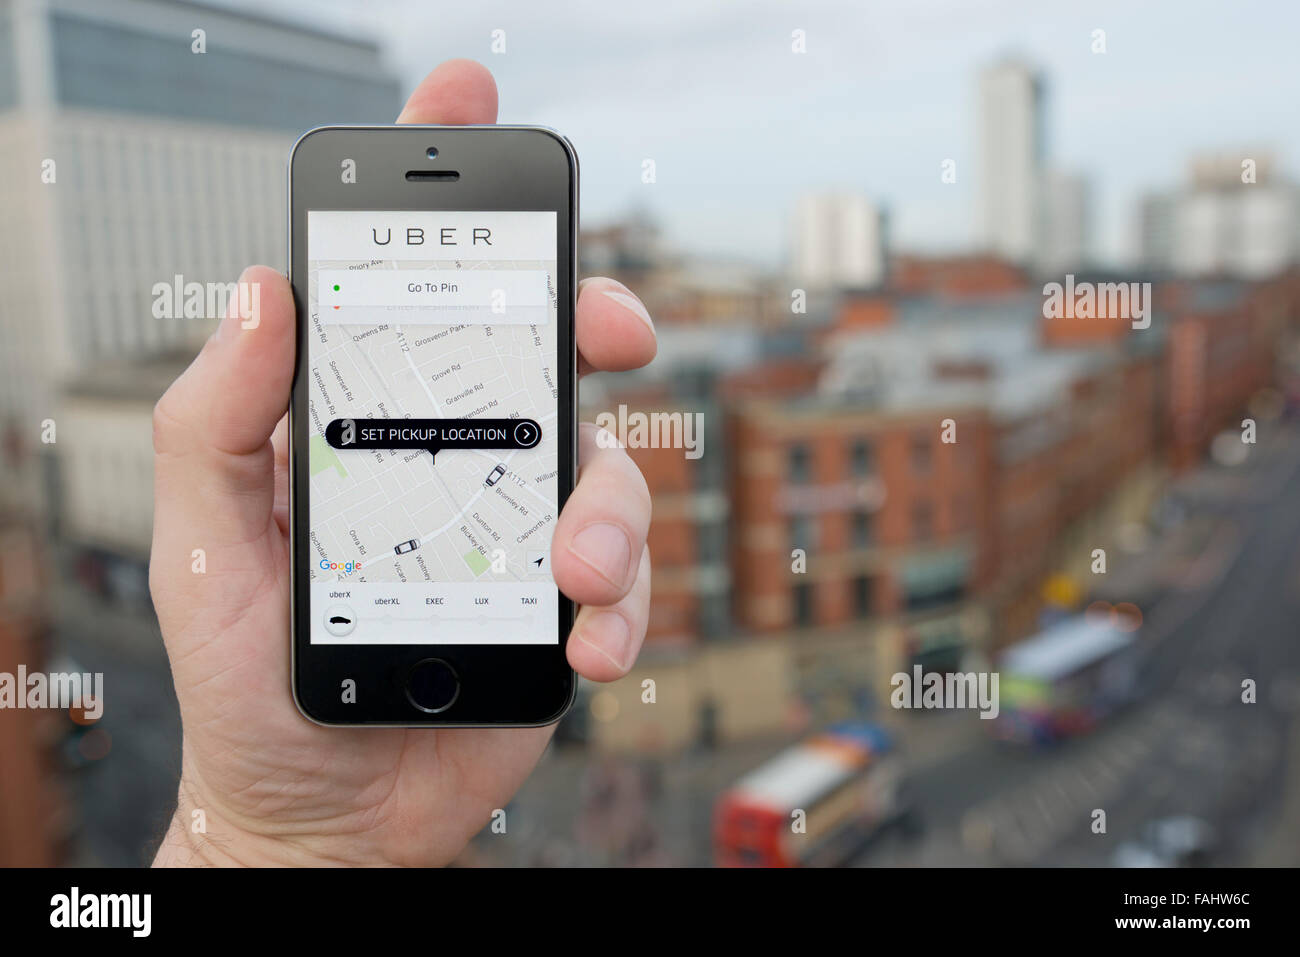 A man uses the Uber taxi smartphone app while stood in a tall building overlooking a busy city street (Editorial use only) Stock Photo